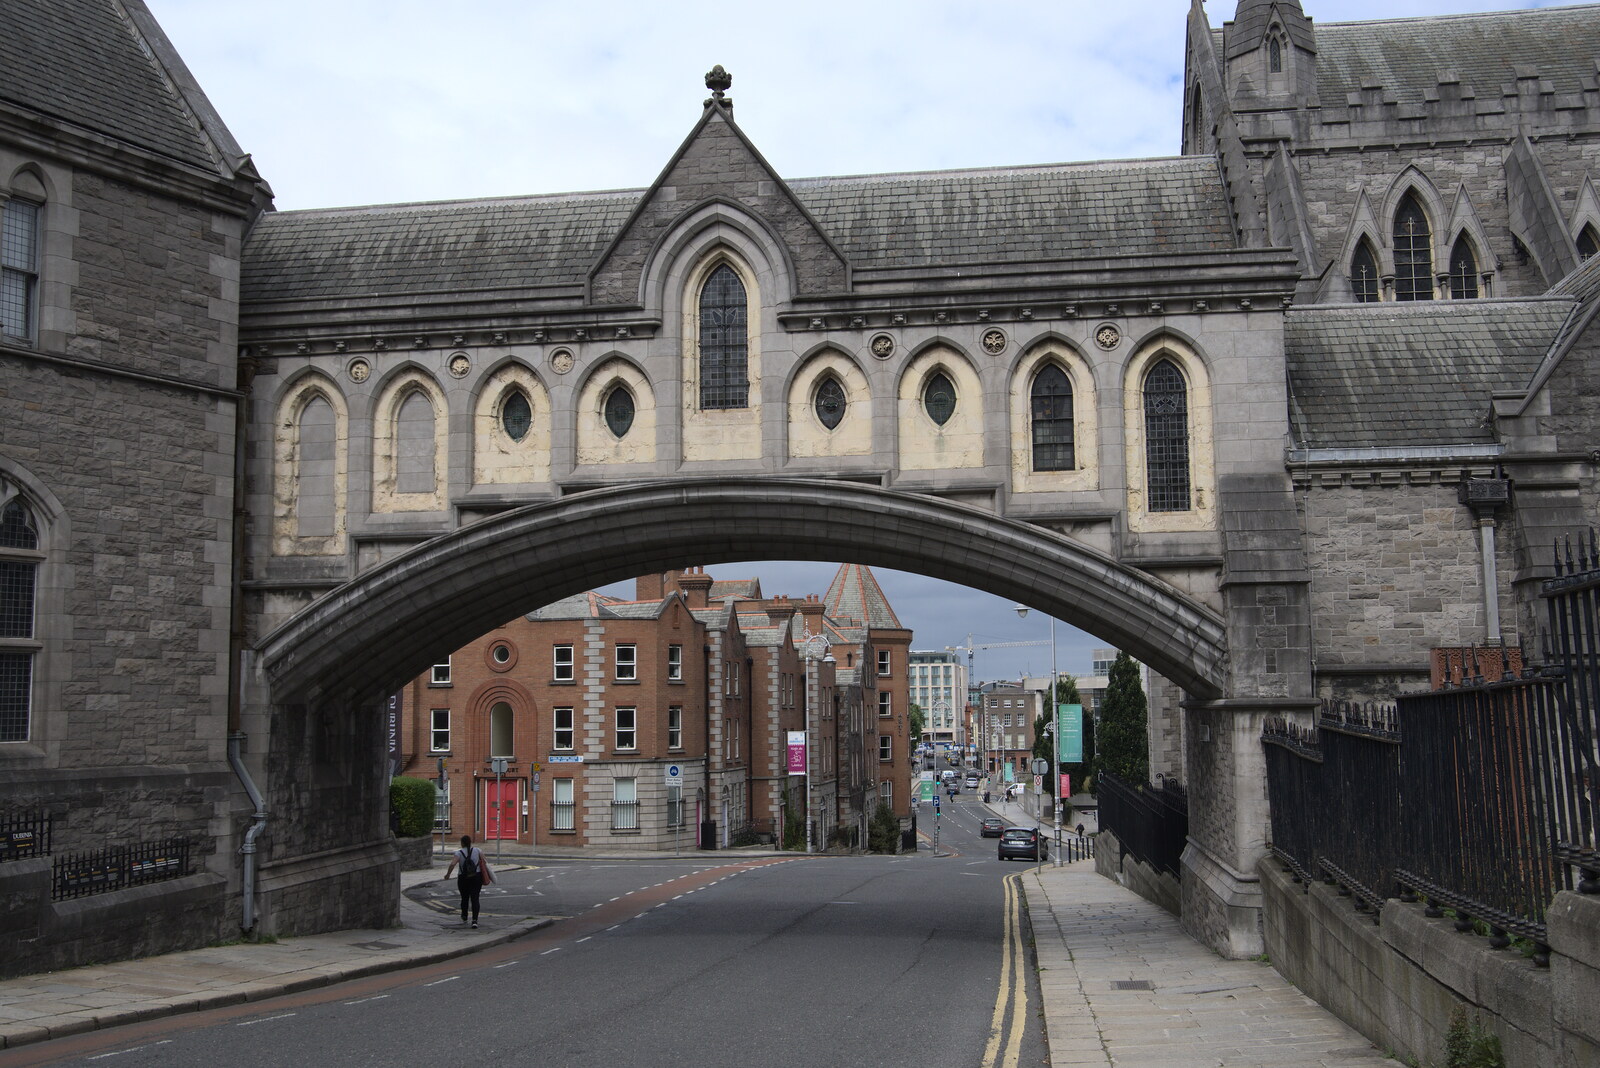 The arch of Christ Church Cathedral from A Trip to Noddy's, and Dublin City Centre, Wicklow and Dublin, Ireland - 16th August 2021